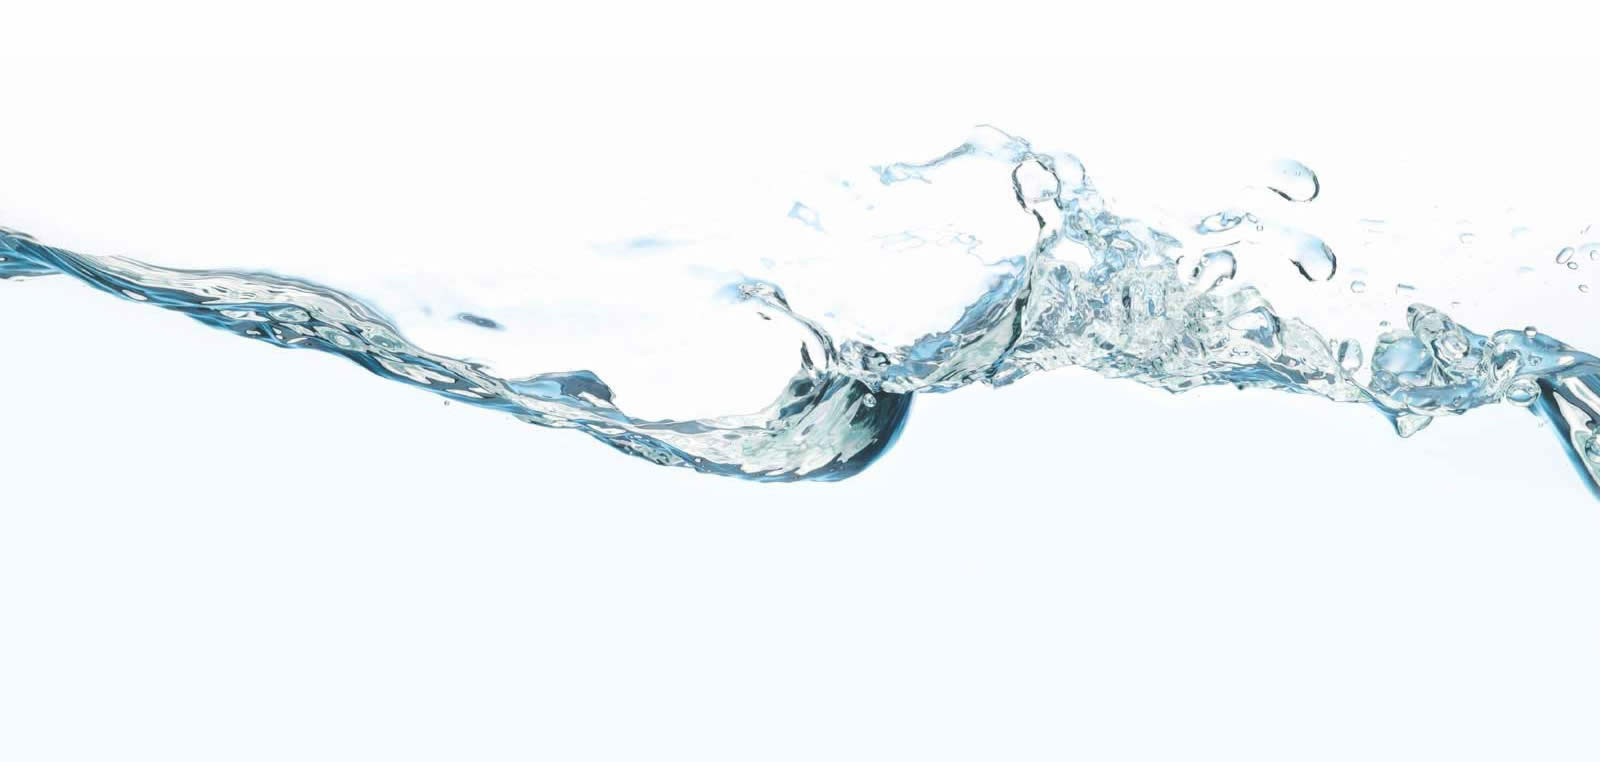 This Is The Water Splash Background Image You Can Use Powerpoint